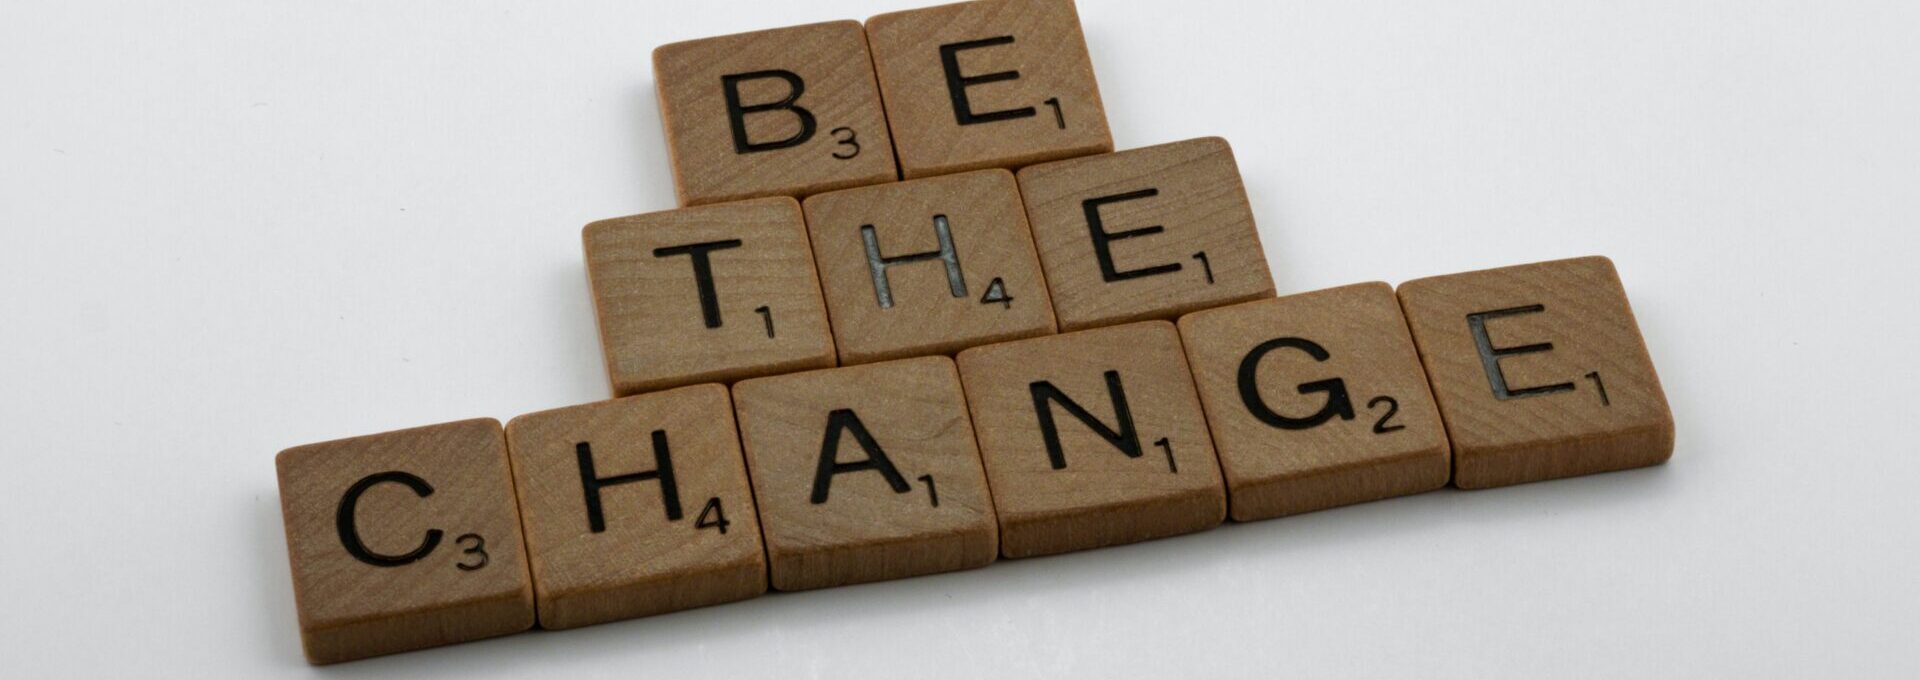 Be the change written in scrabble pieces 